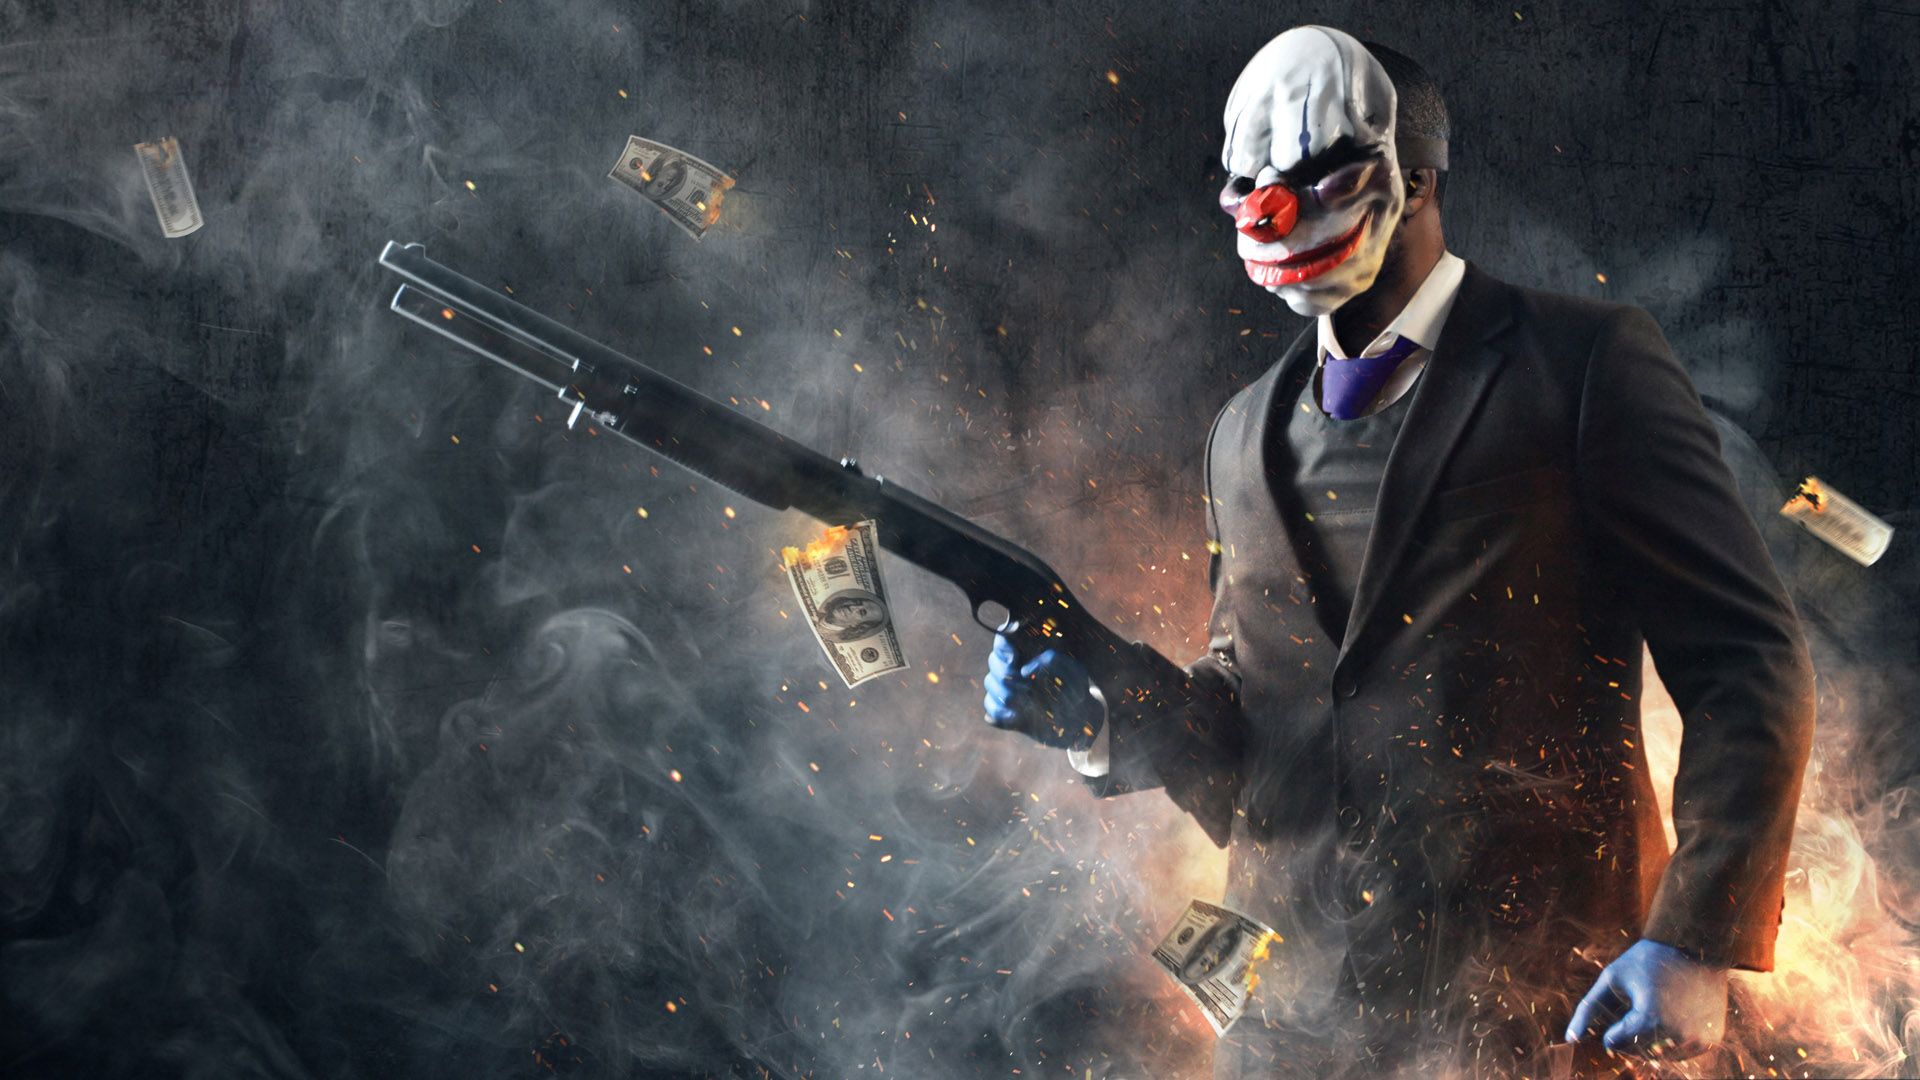 Chains From Payday 2 - HD Wallpaper 